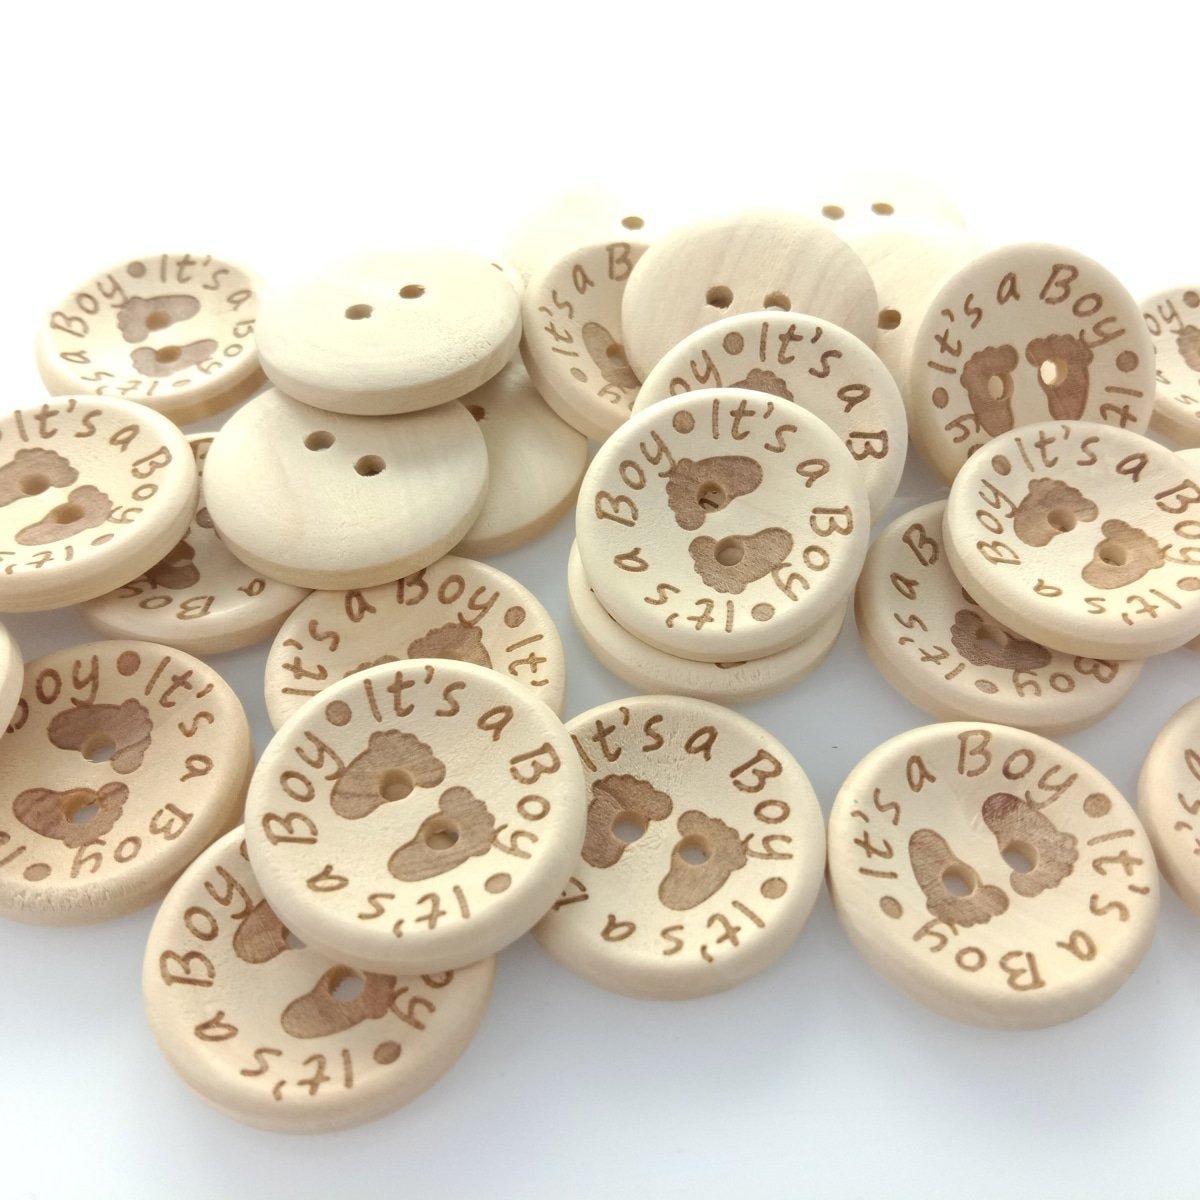 15/20/25mm It's a Girl/Boy Wooden Button Natural Wood Sewing Baby Clothing Buttons - It's a Boy 25mm 30pcs - - Asia Sell